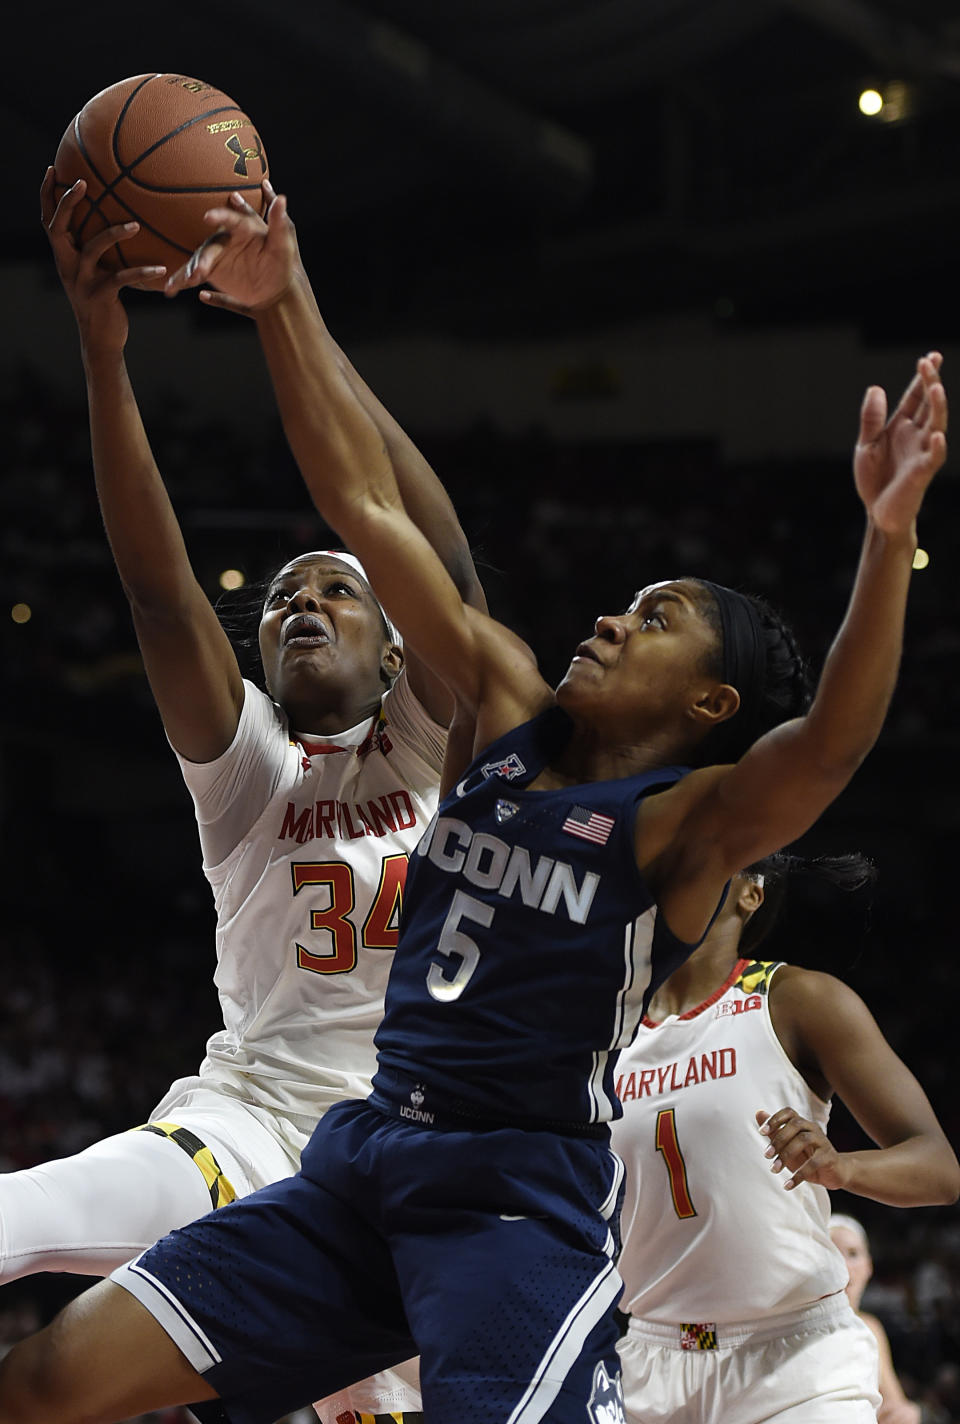 Maryland's Brianna Fraser, left, and Connecticut's Crystal Dangerfield vie for a rebound during the first half of an NCAA college basketball game, Thursday, Dec. 29, 2016 in College Park, Md. Connecticut won 87-81. (AP Photo/Gail Burton)